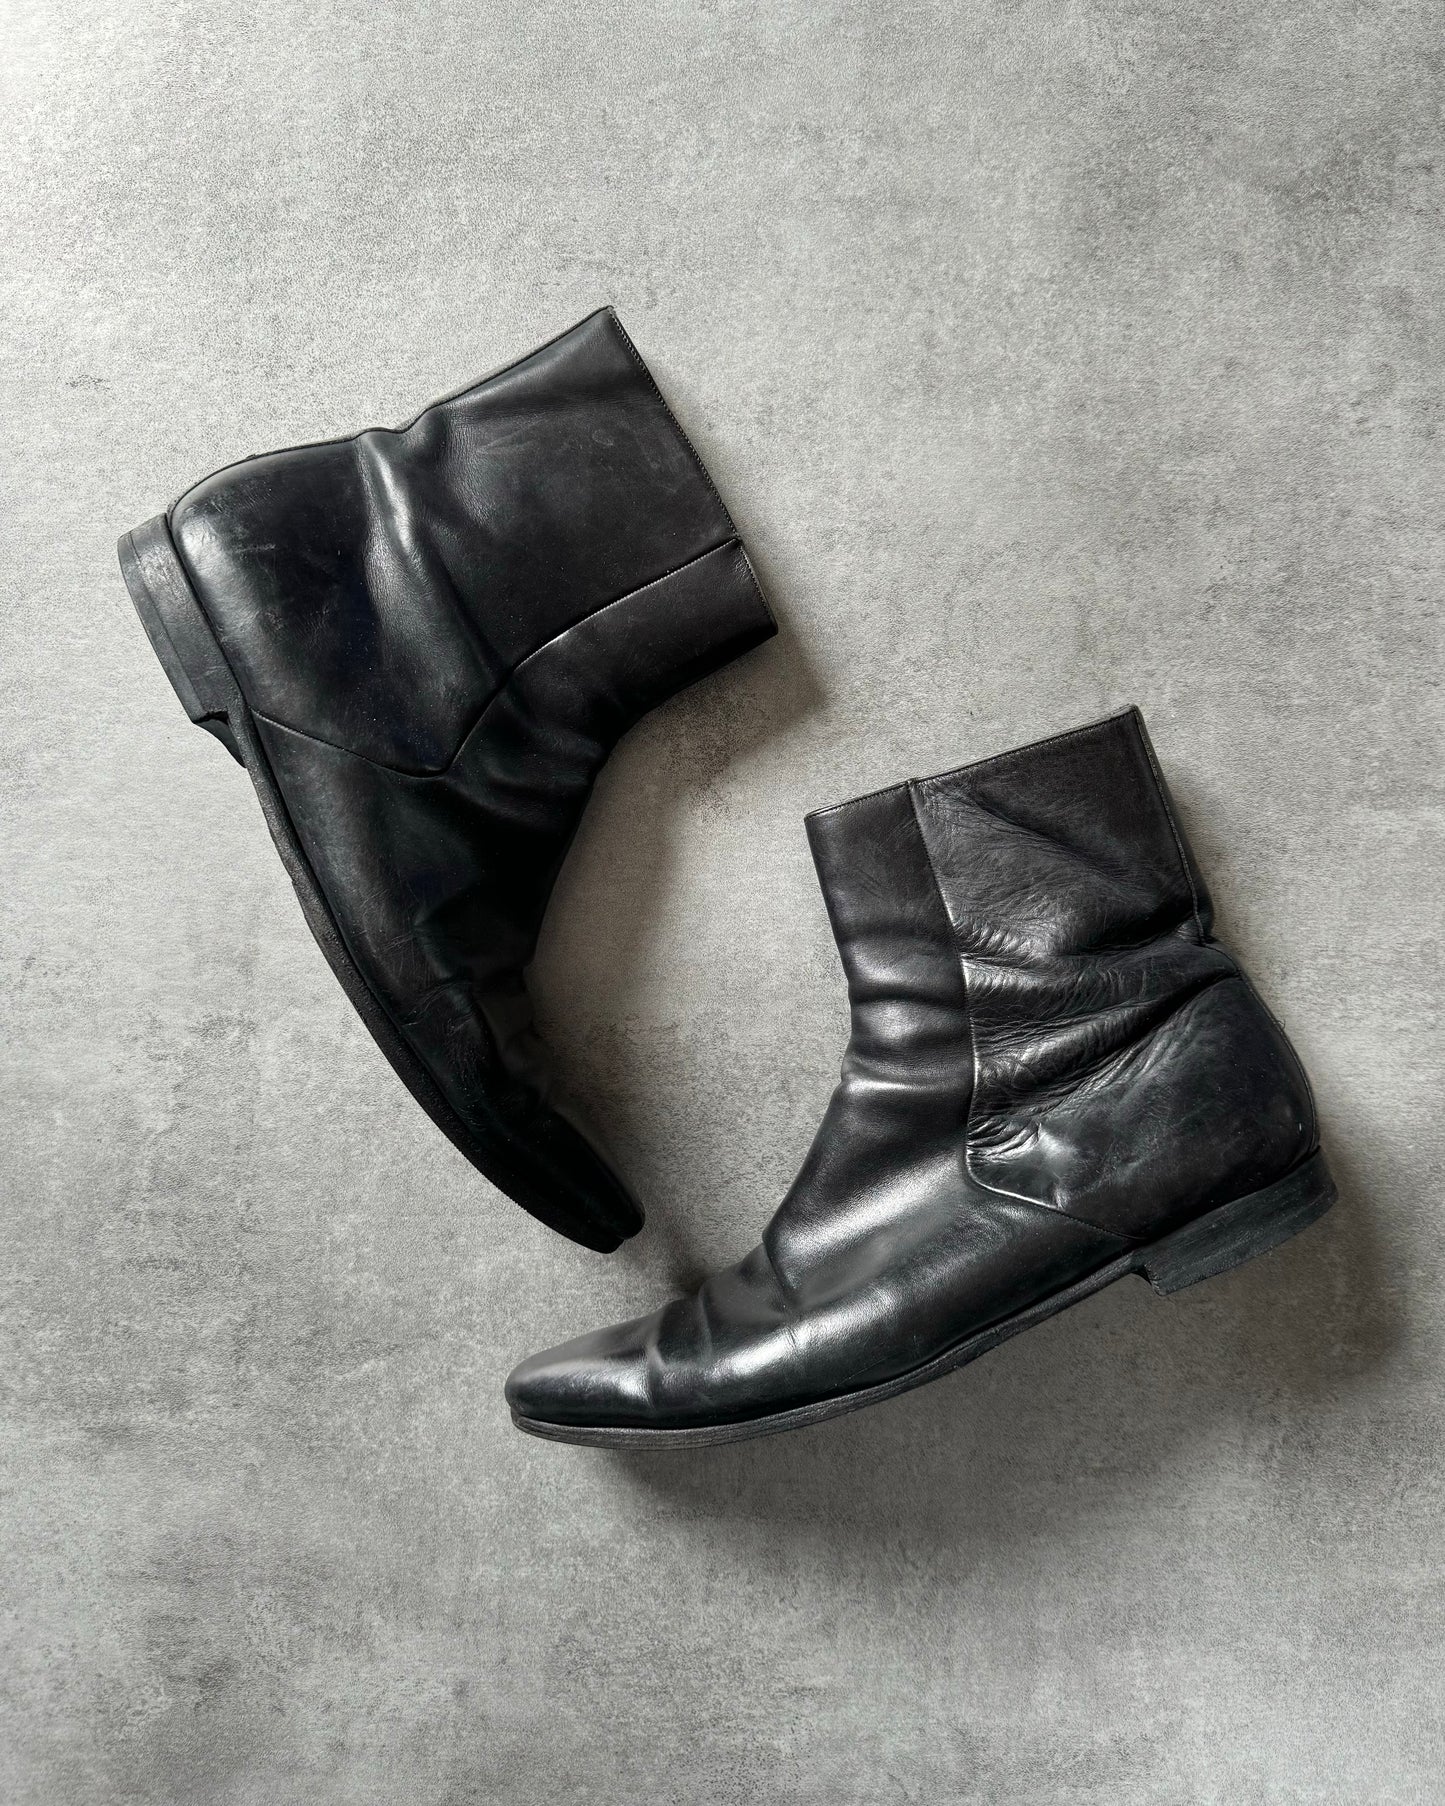 FW2001 Gucci Black Leather Boots by Tom Ford (45) - 10